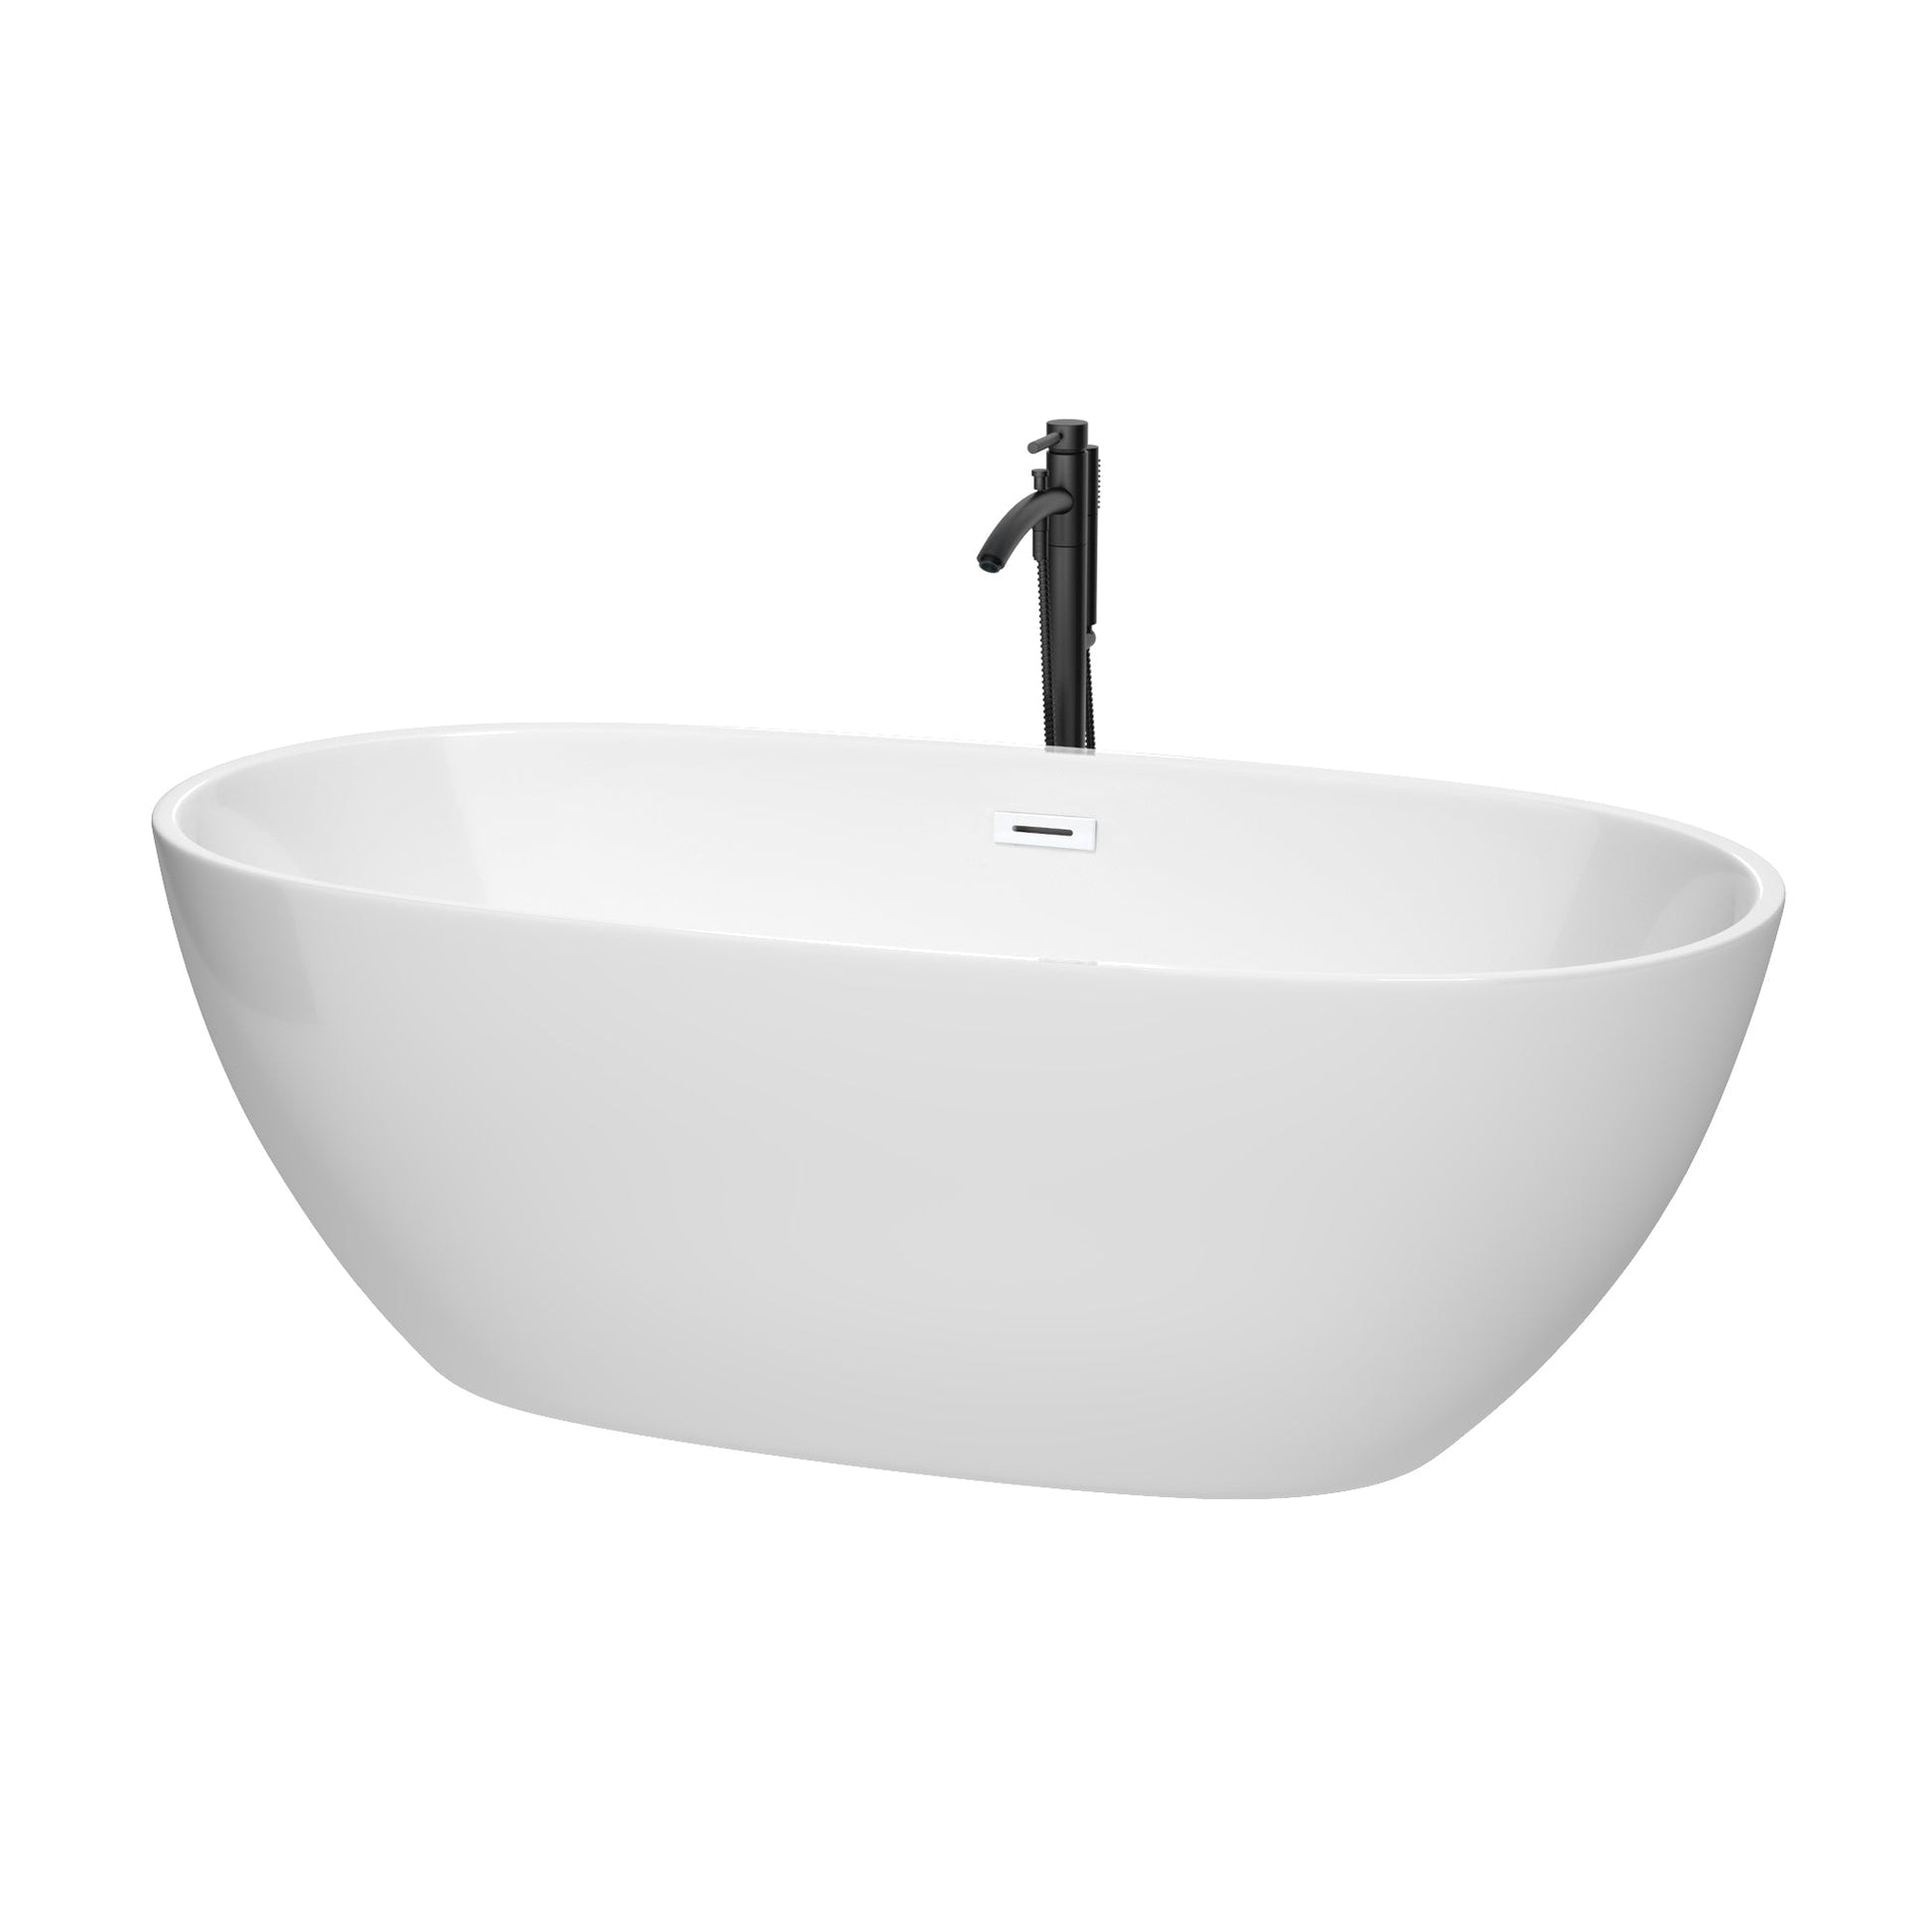 Wyndham Collection Juno 67" Freestanding Bathtub in White With Shiny White Trim and Floor Mounted Faucet in Matte Black